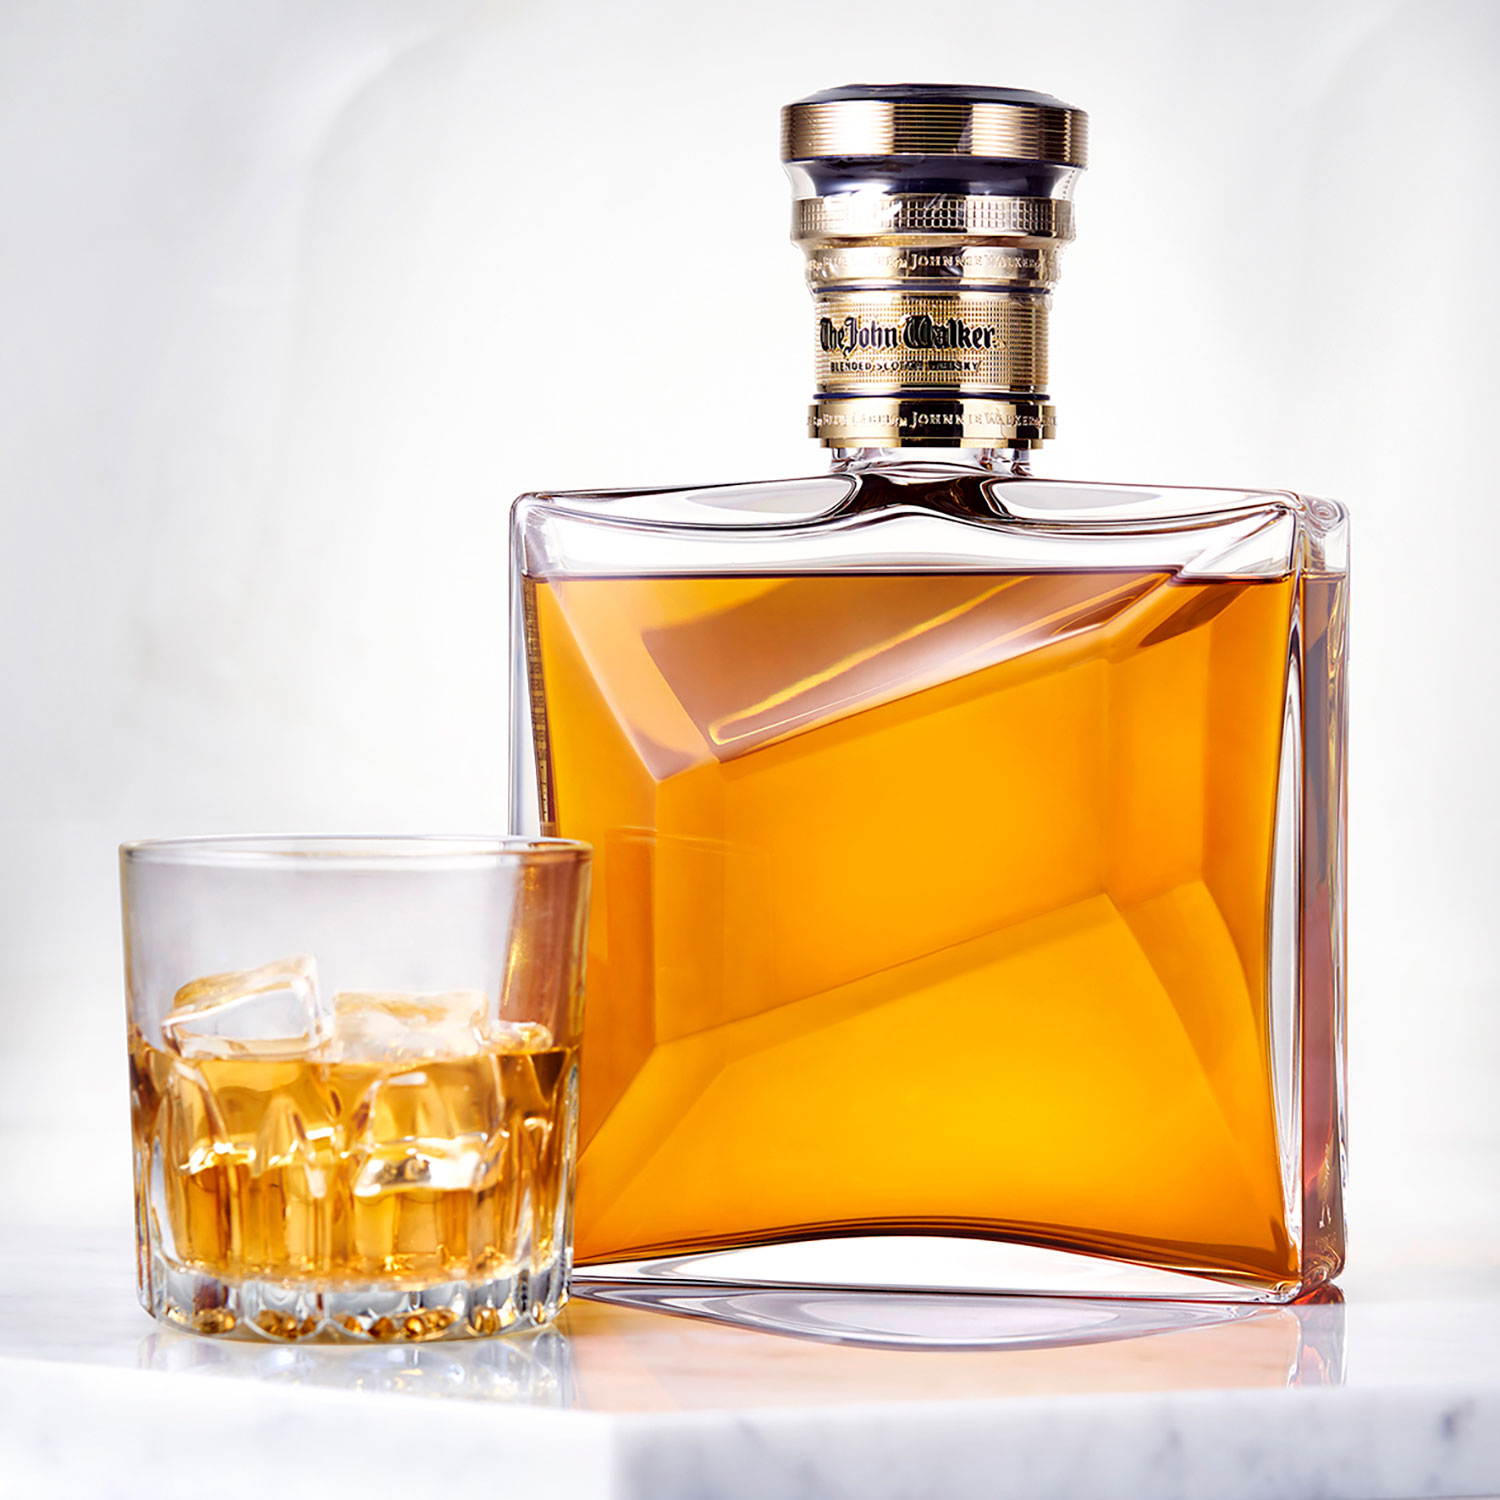 scotch-whisky-product-photography-8